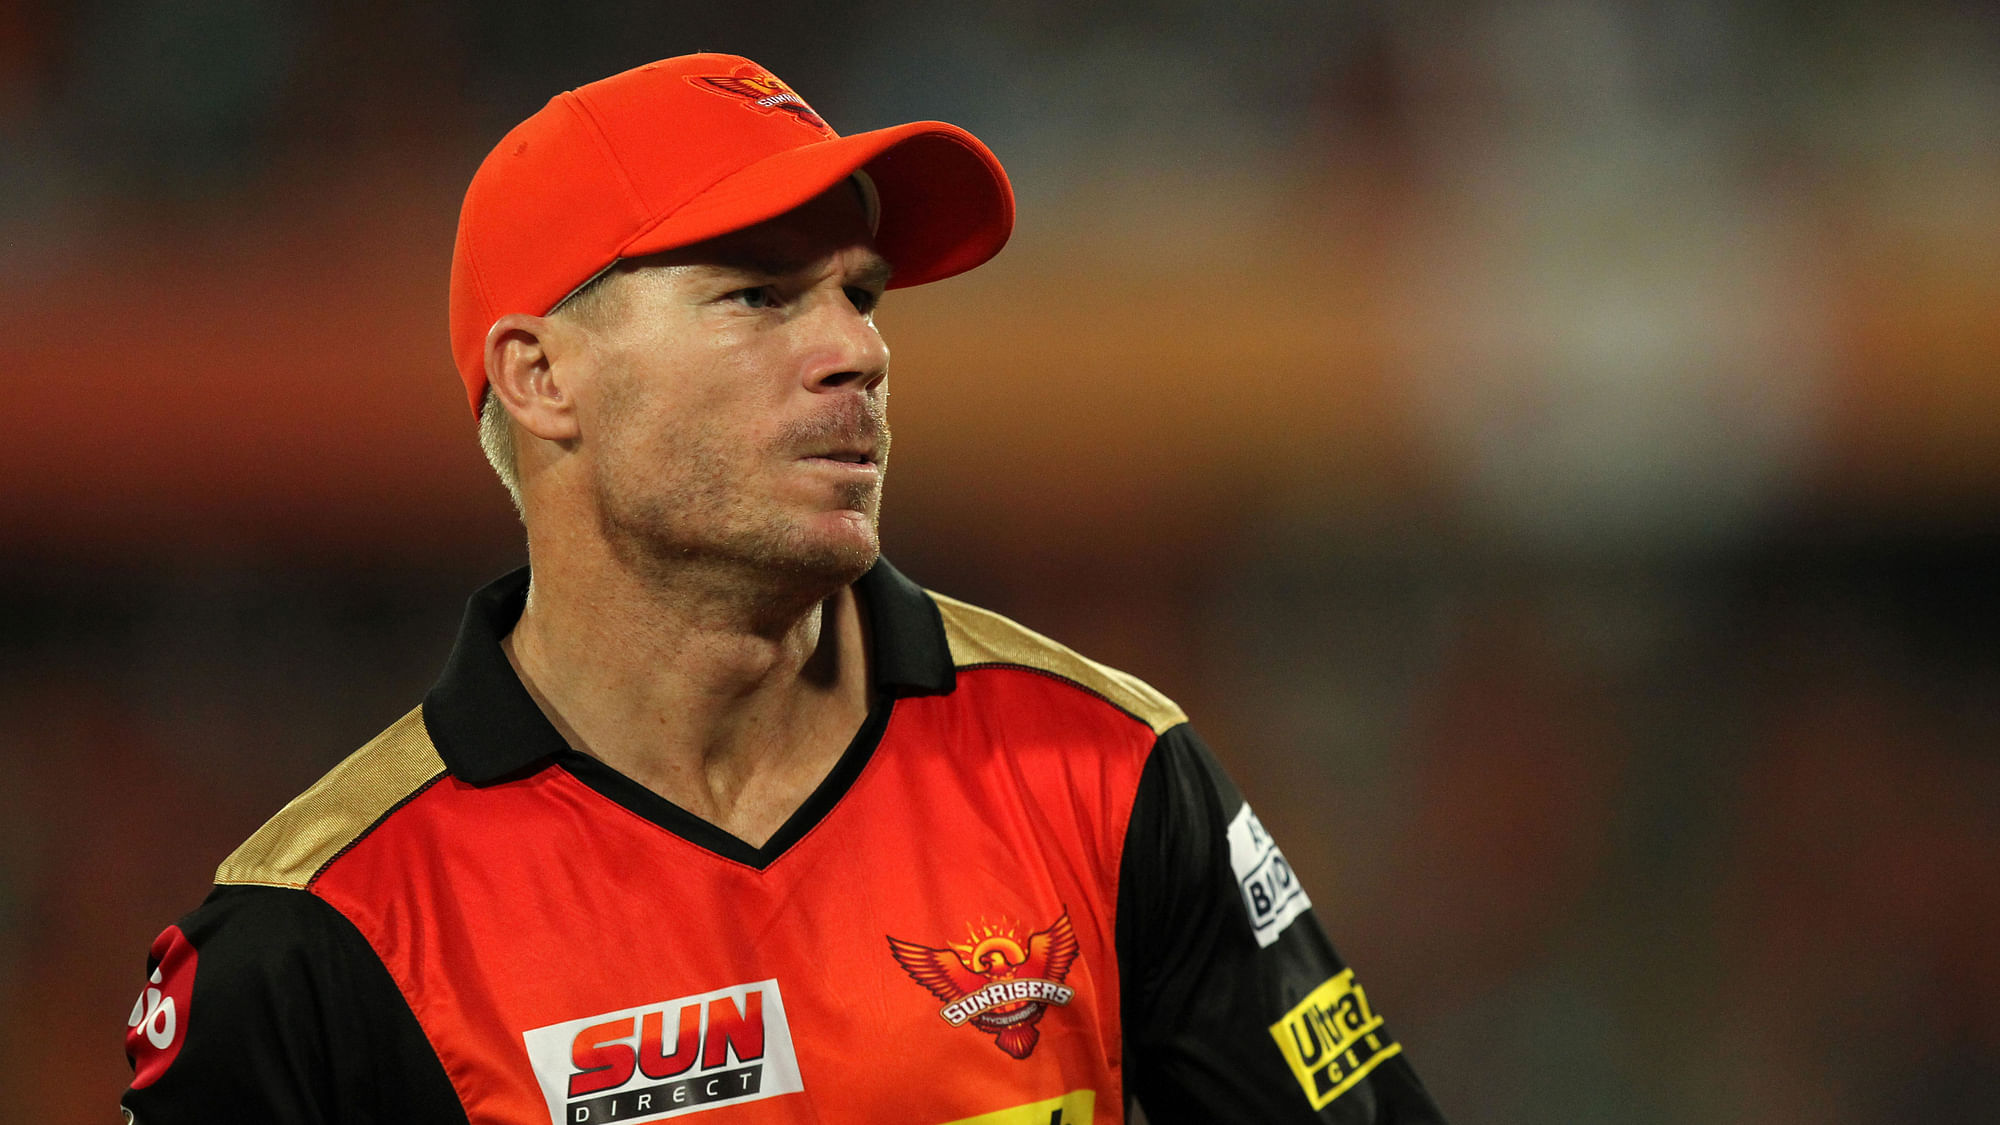 Owing to the ban, David Warner missed the IPL’s last edition, but is available for the 12th season of the tournament.